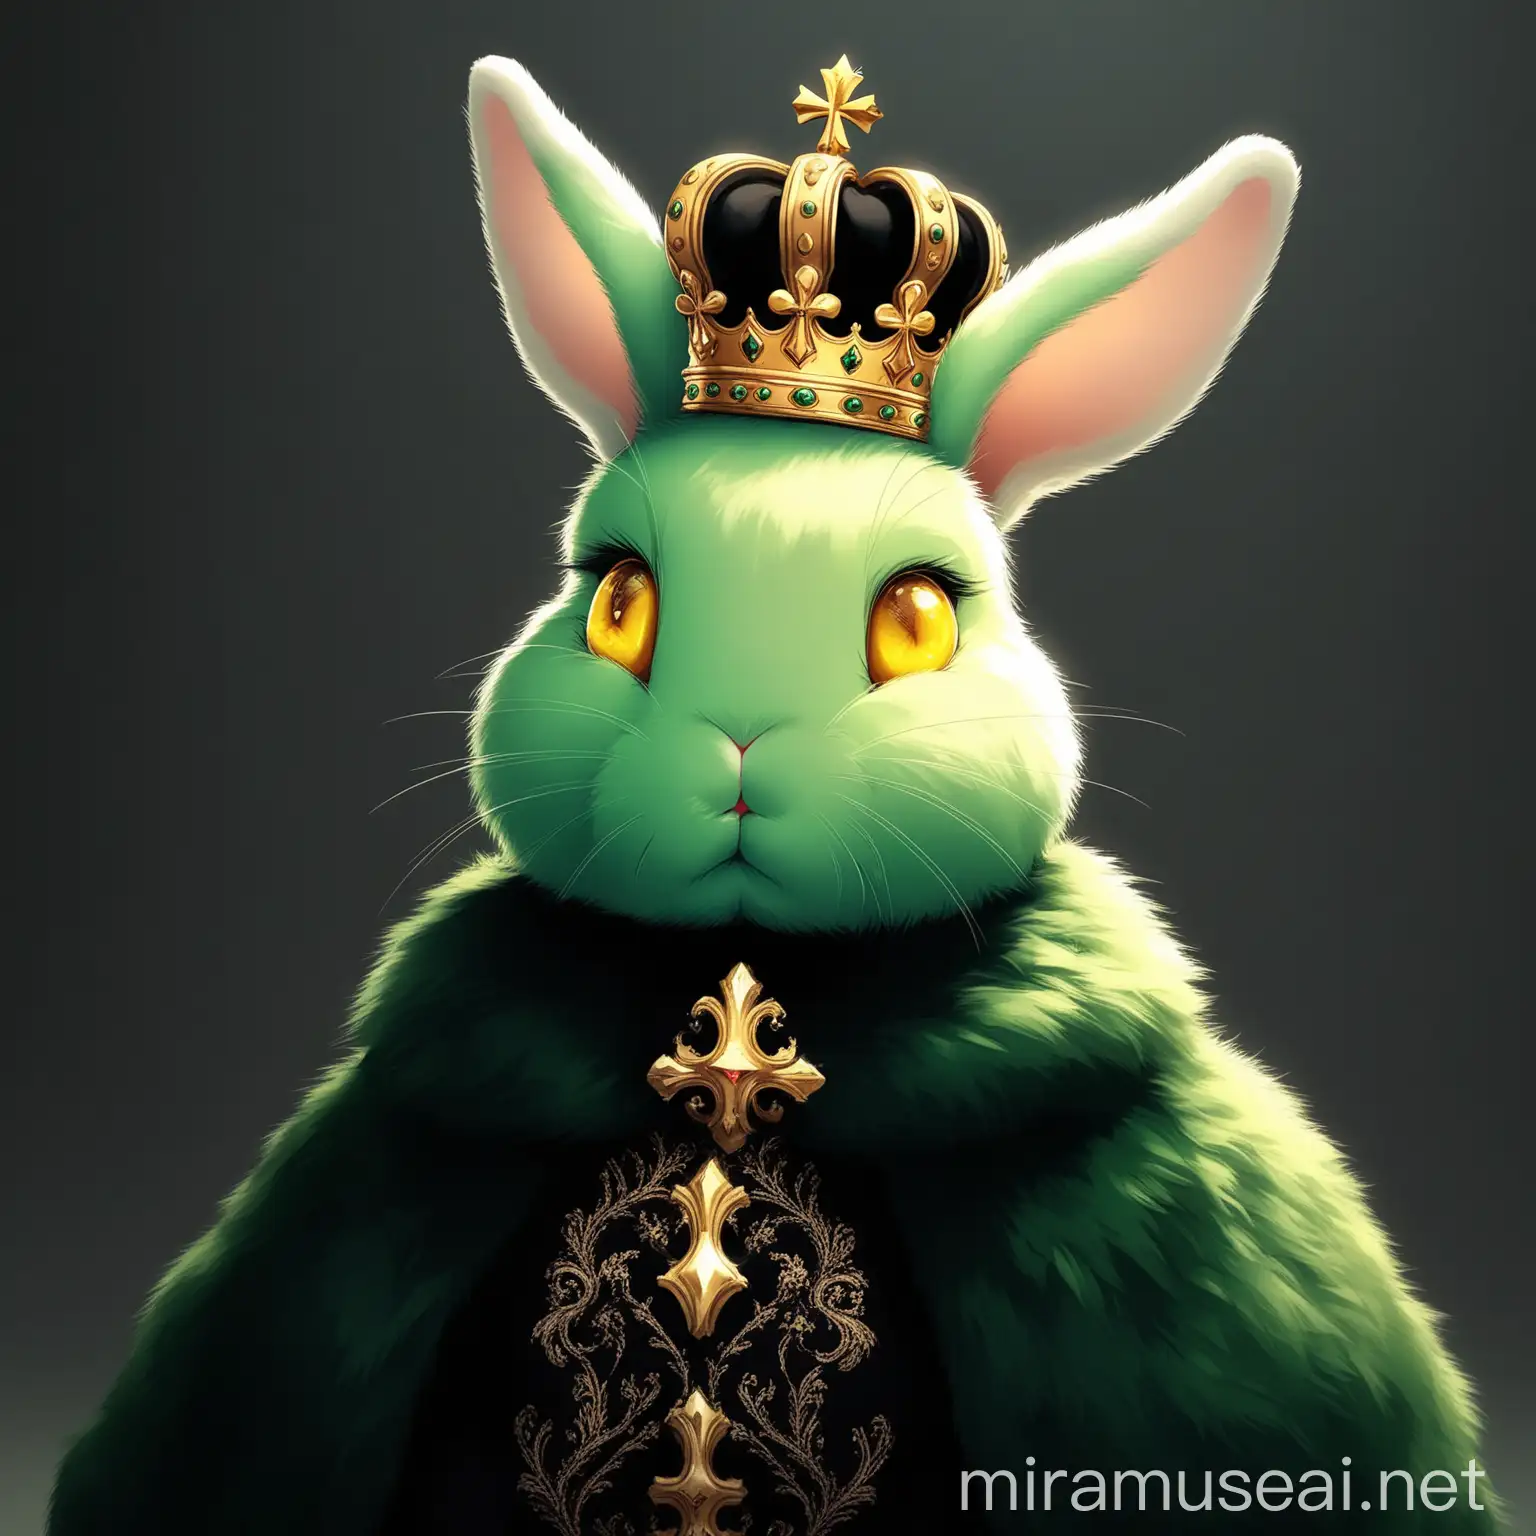 a yellow eyes rabbit, the rabbit has green fur allover its body and it wears a black gown, A small crown on its head.